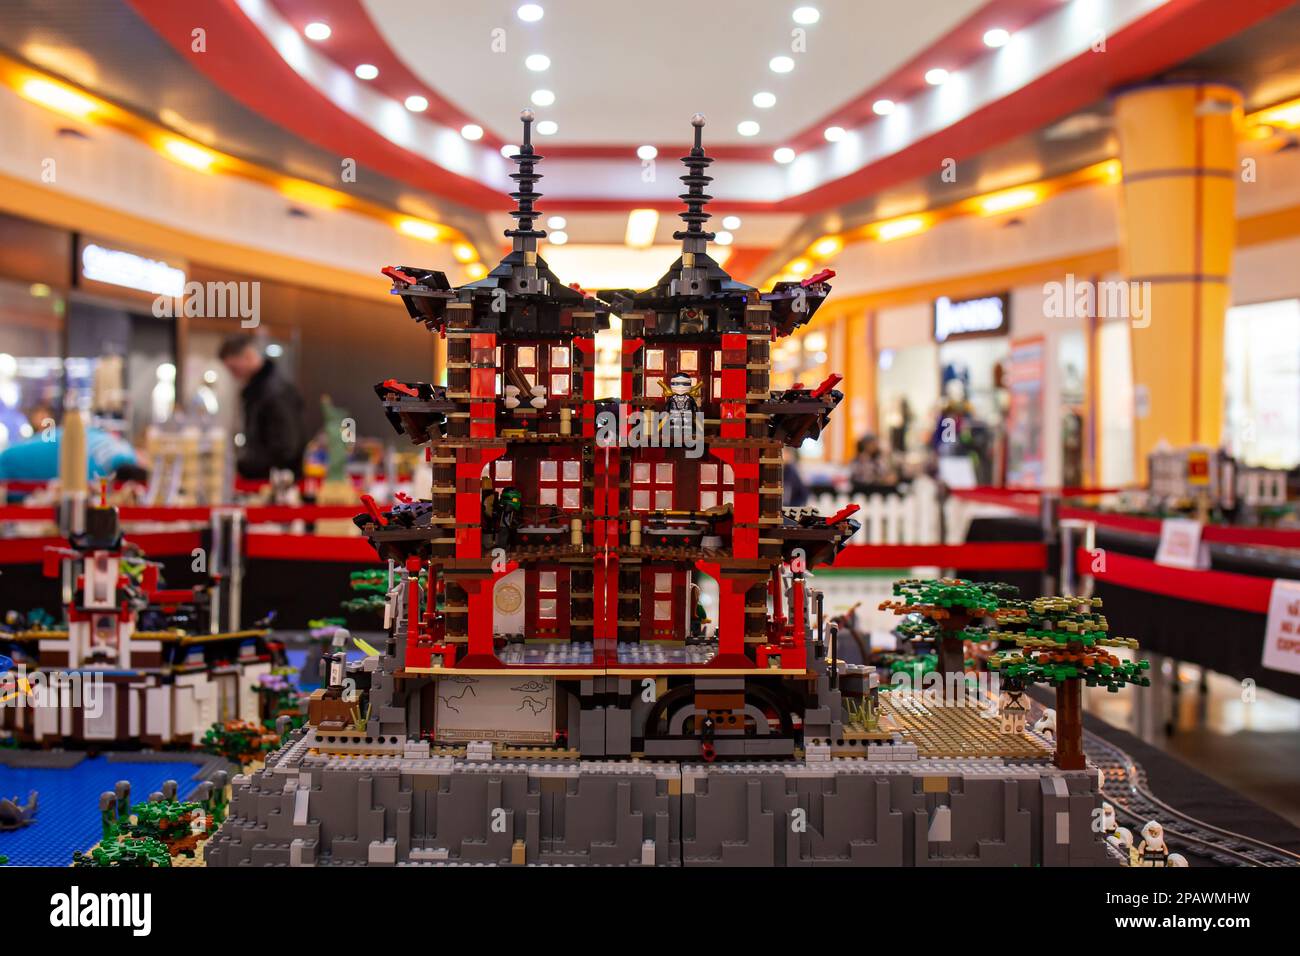 Asian temple scene with ninjago warriors made from lego blocks at a mall exibition Stock Photo